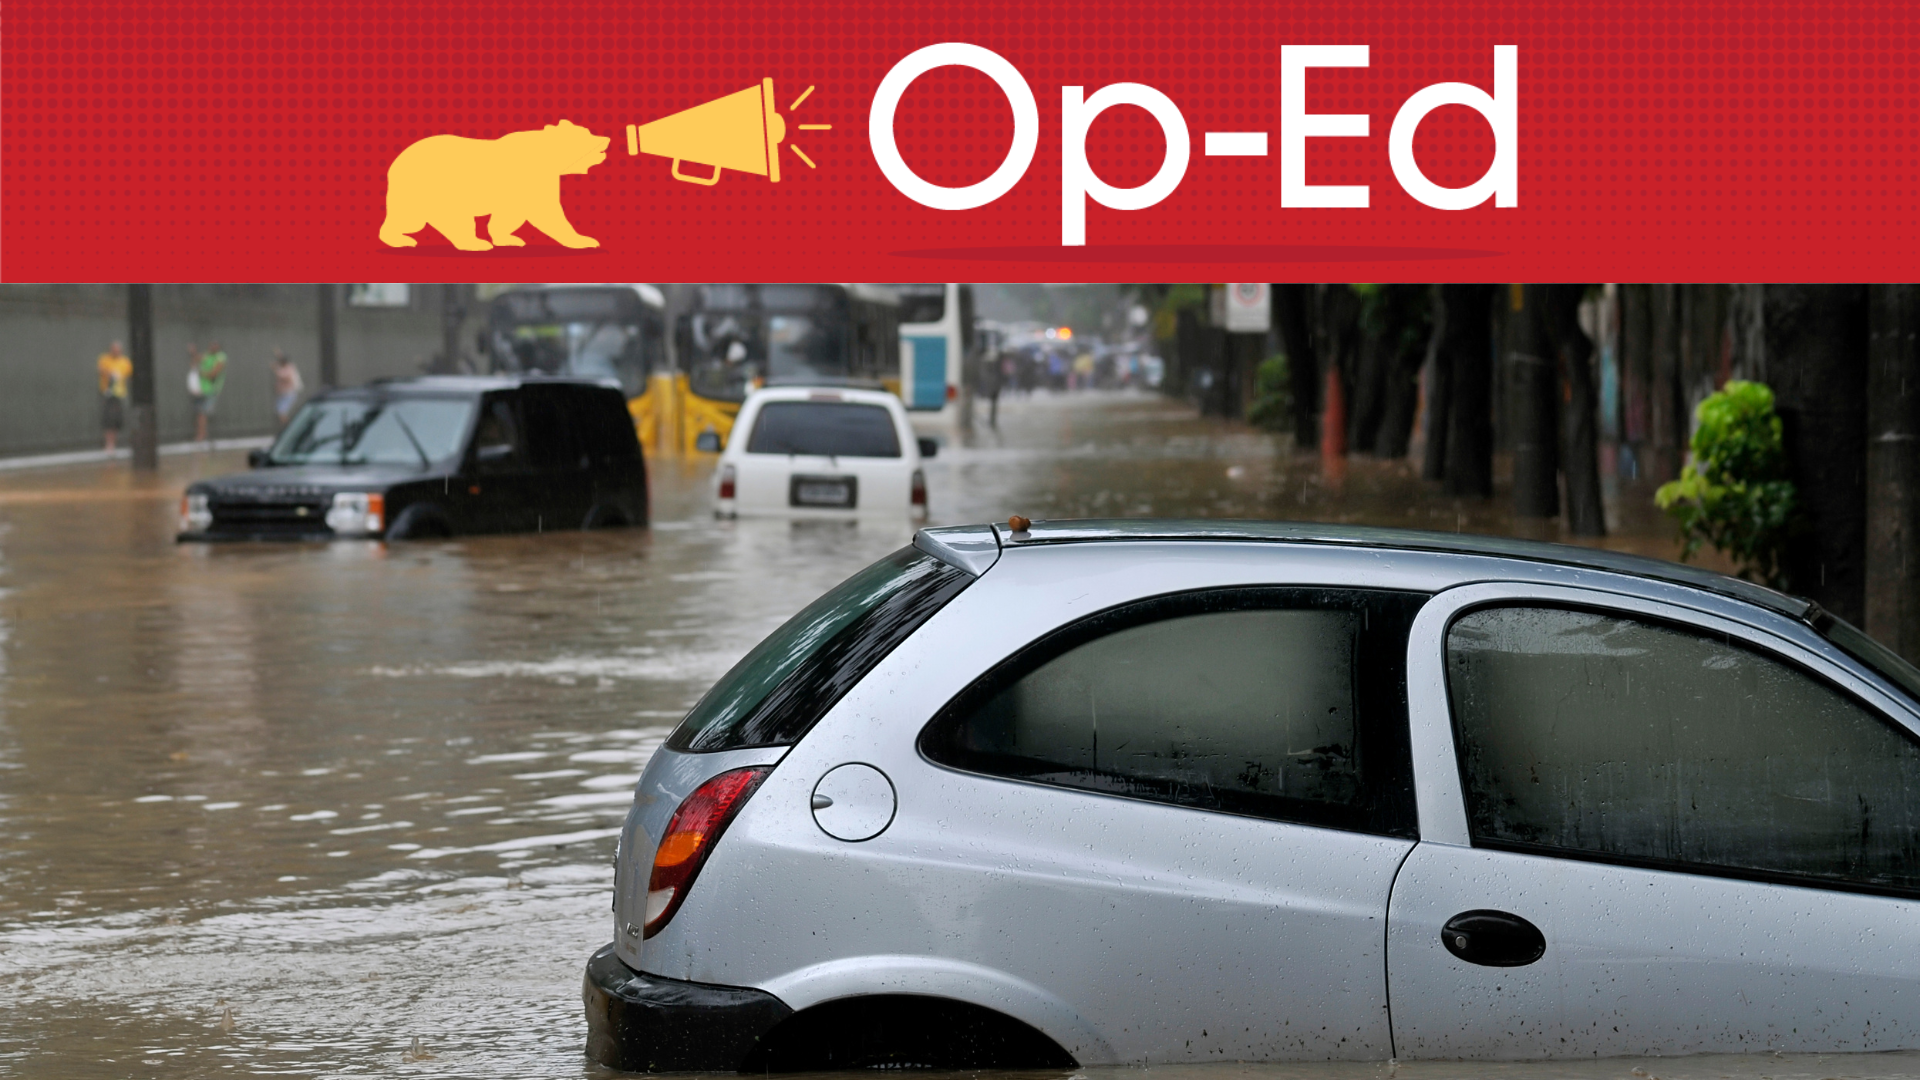 Op-Ed; picture of car in flooded street